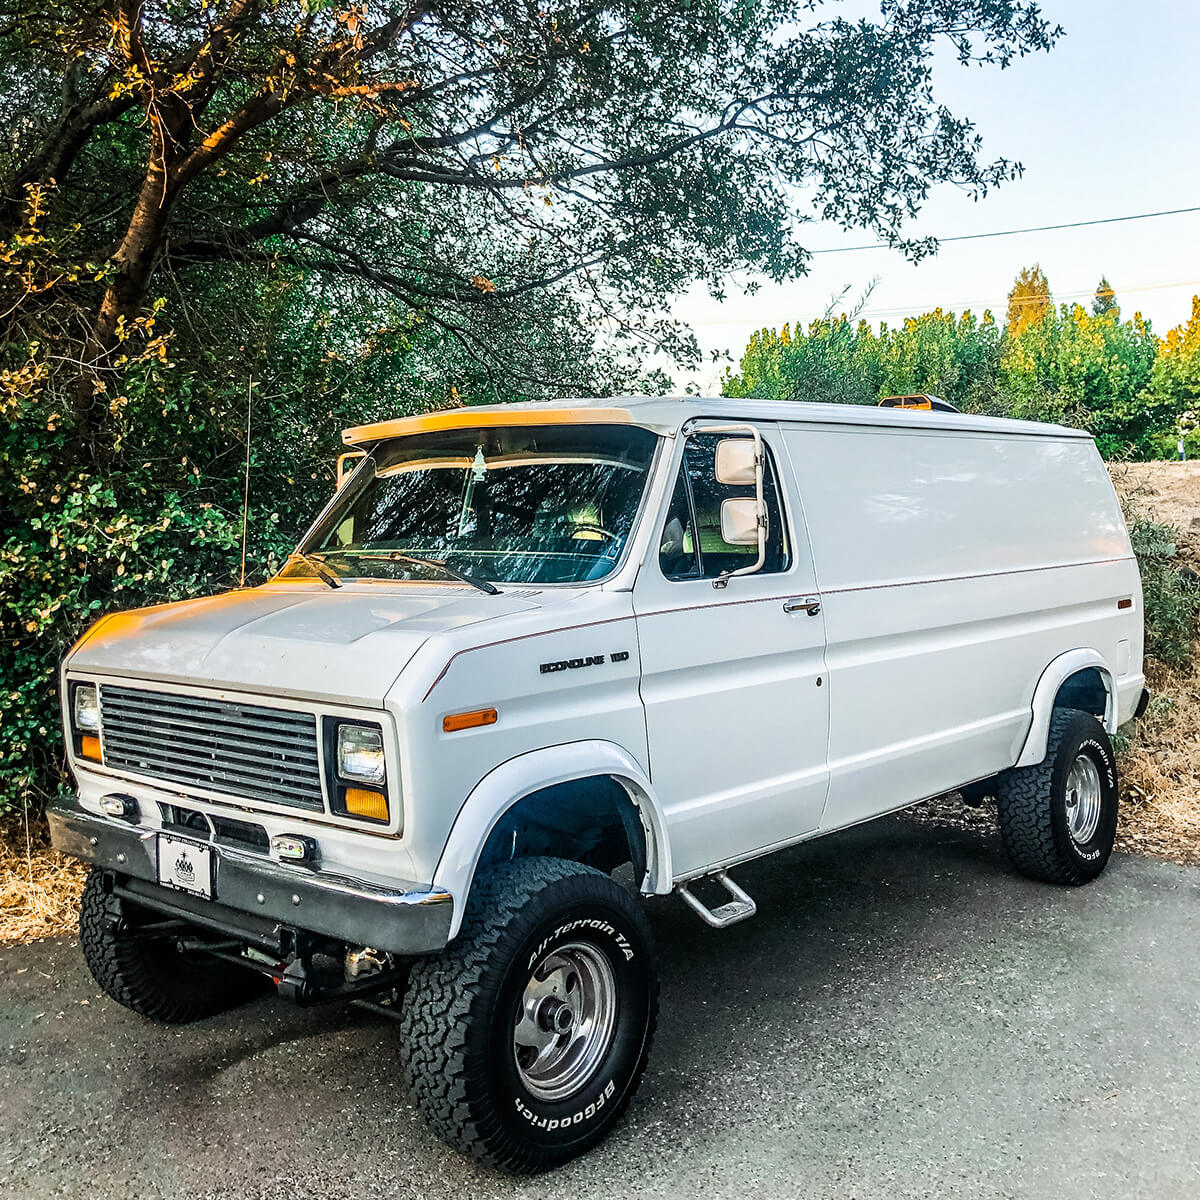 Lifted 1990 Ford E150 Van – Classic Look with a Modern Twist